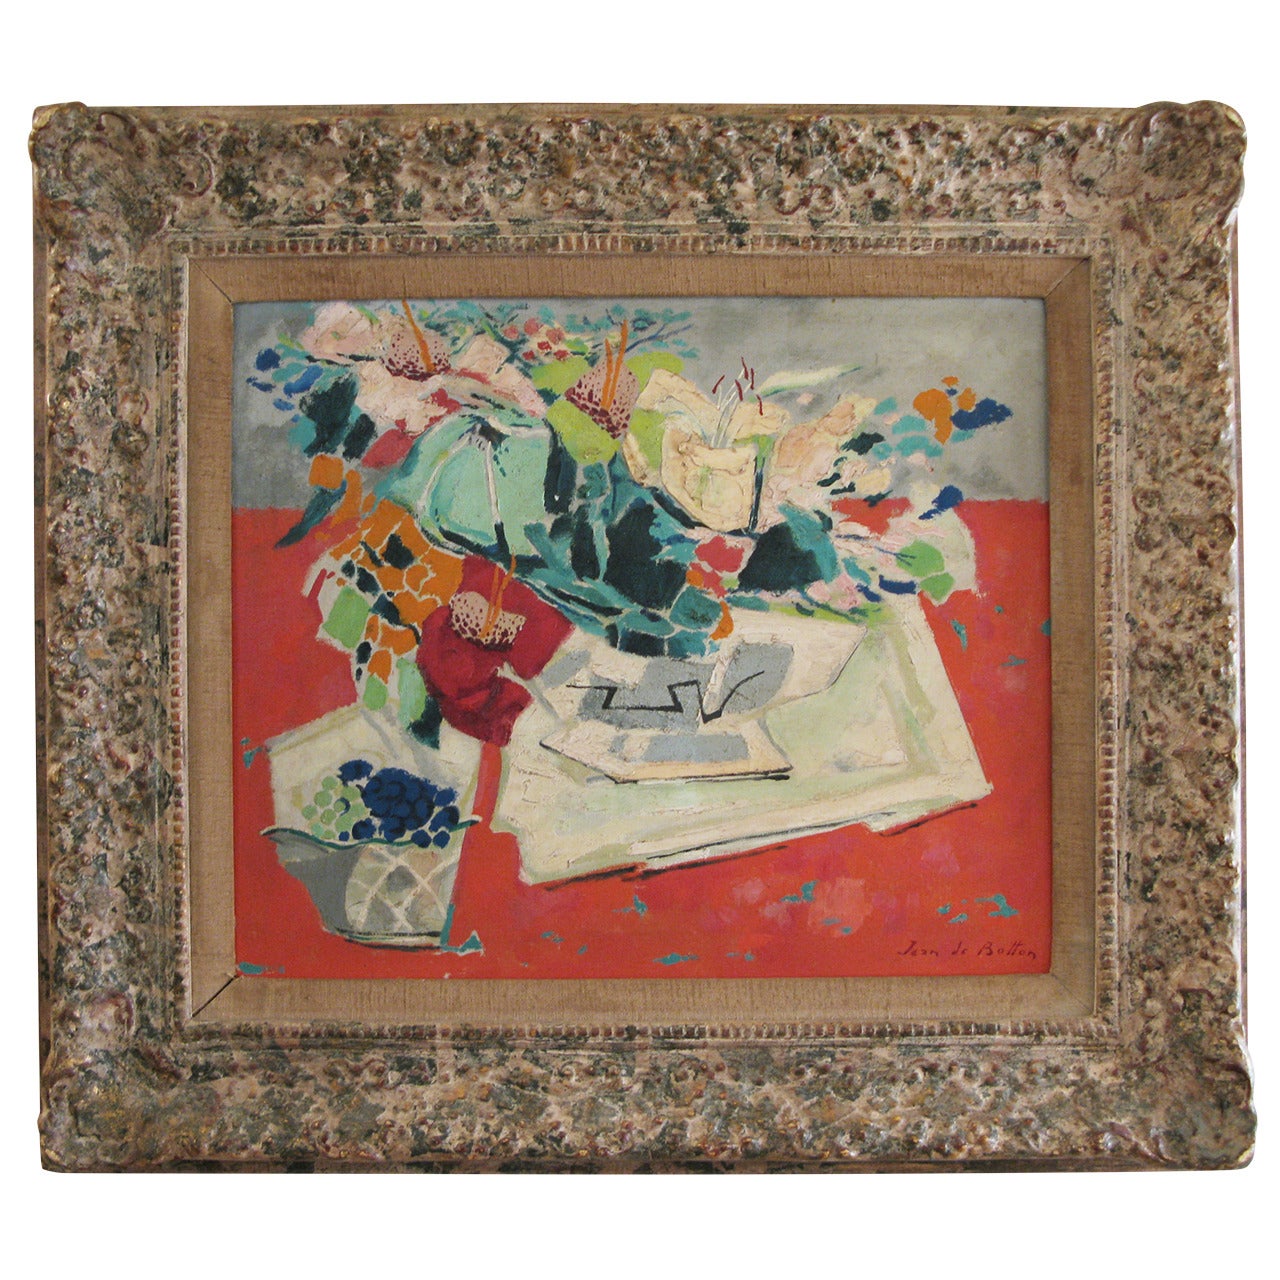 Abstract Cubist Still-Life Painting by Jean de Botton